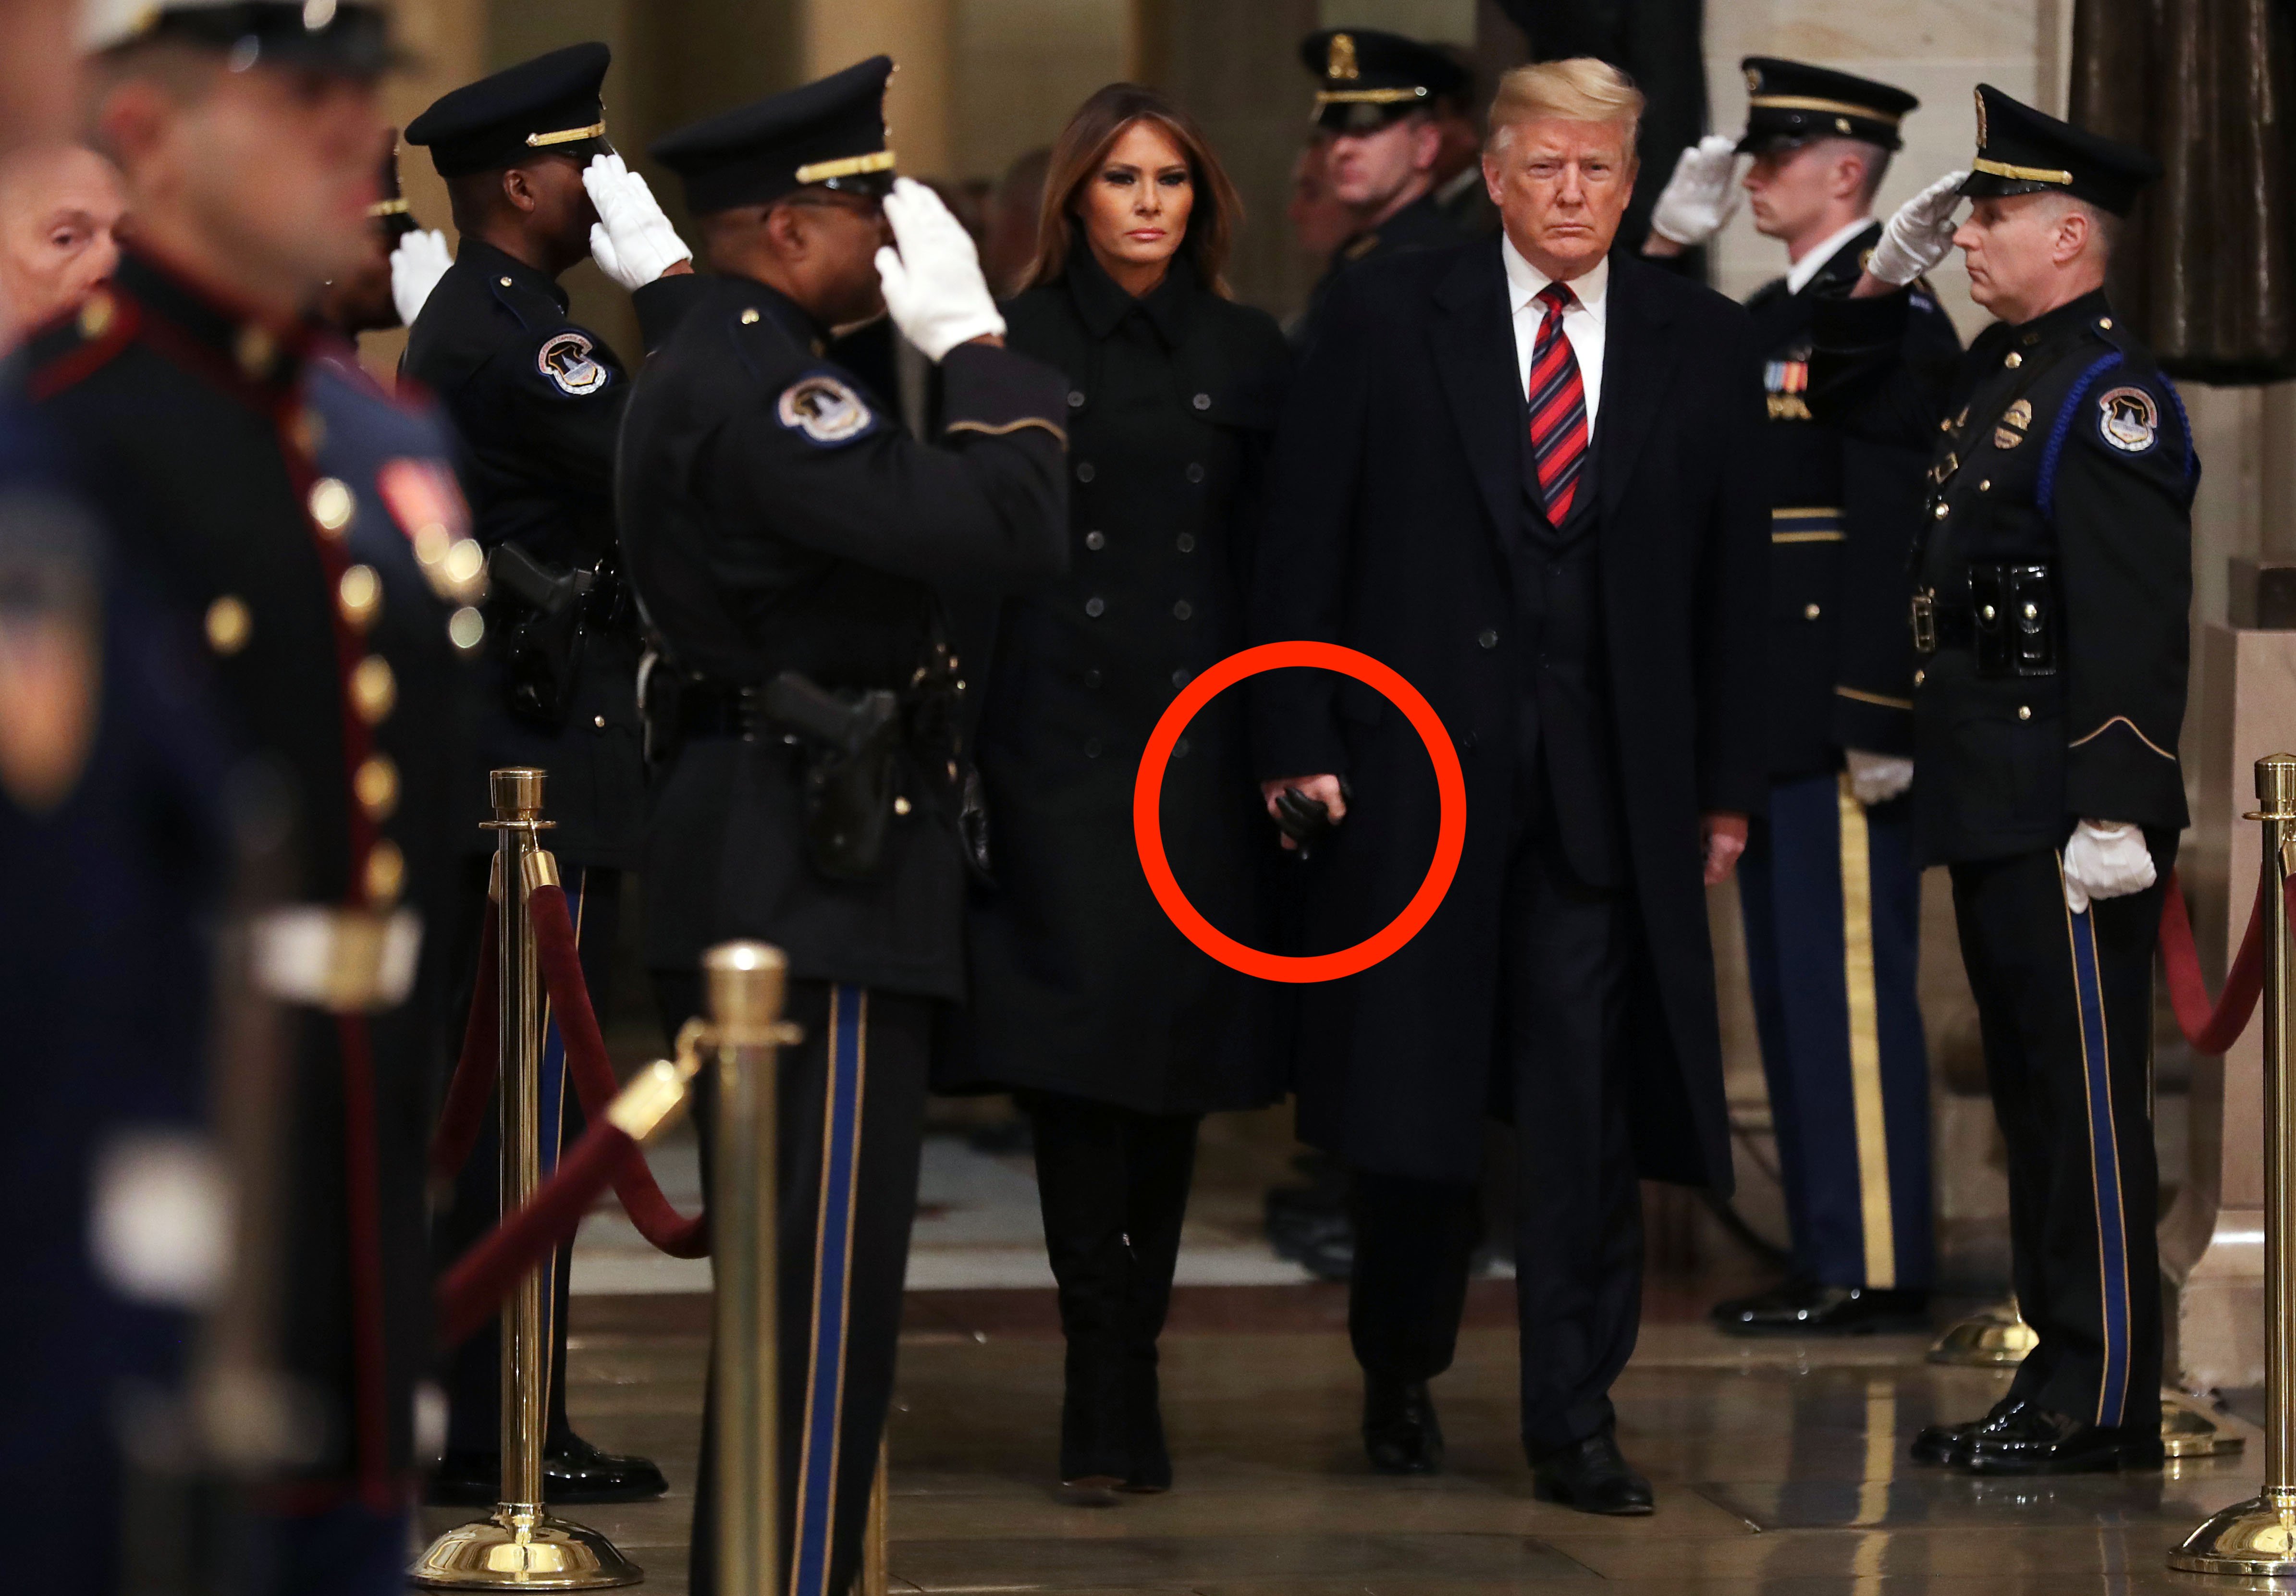 WASHINGTON, DC - DECEMBER 03: U.S. President Donald Trump and first lady Melania Trump arrive in the U.S. Capitol Rotunda to pay their respects as former U.S. President George H.W. Bush lies in state December 03, 2018 in Washington, DC. A WWII combat veteran, Bush served as a member of Congress from Texas, ambassador to the United Nations, director of the CIA, vice president and 41st president of the United States. Members of the public can pay their respects as Bush lays in state until Wednesday, when he will be honored during a memorial service at the National Cathedral. Chip Somodevilla/Getty Images